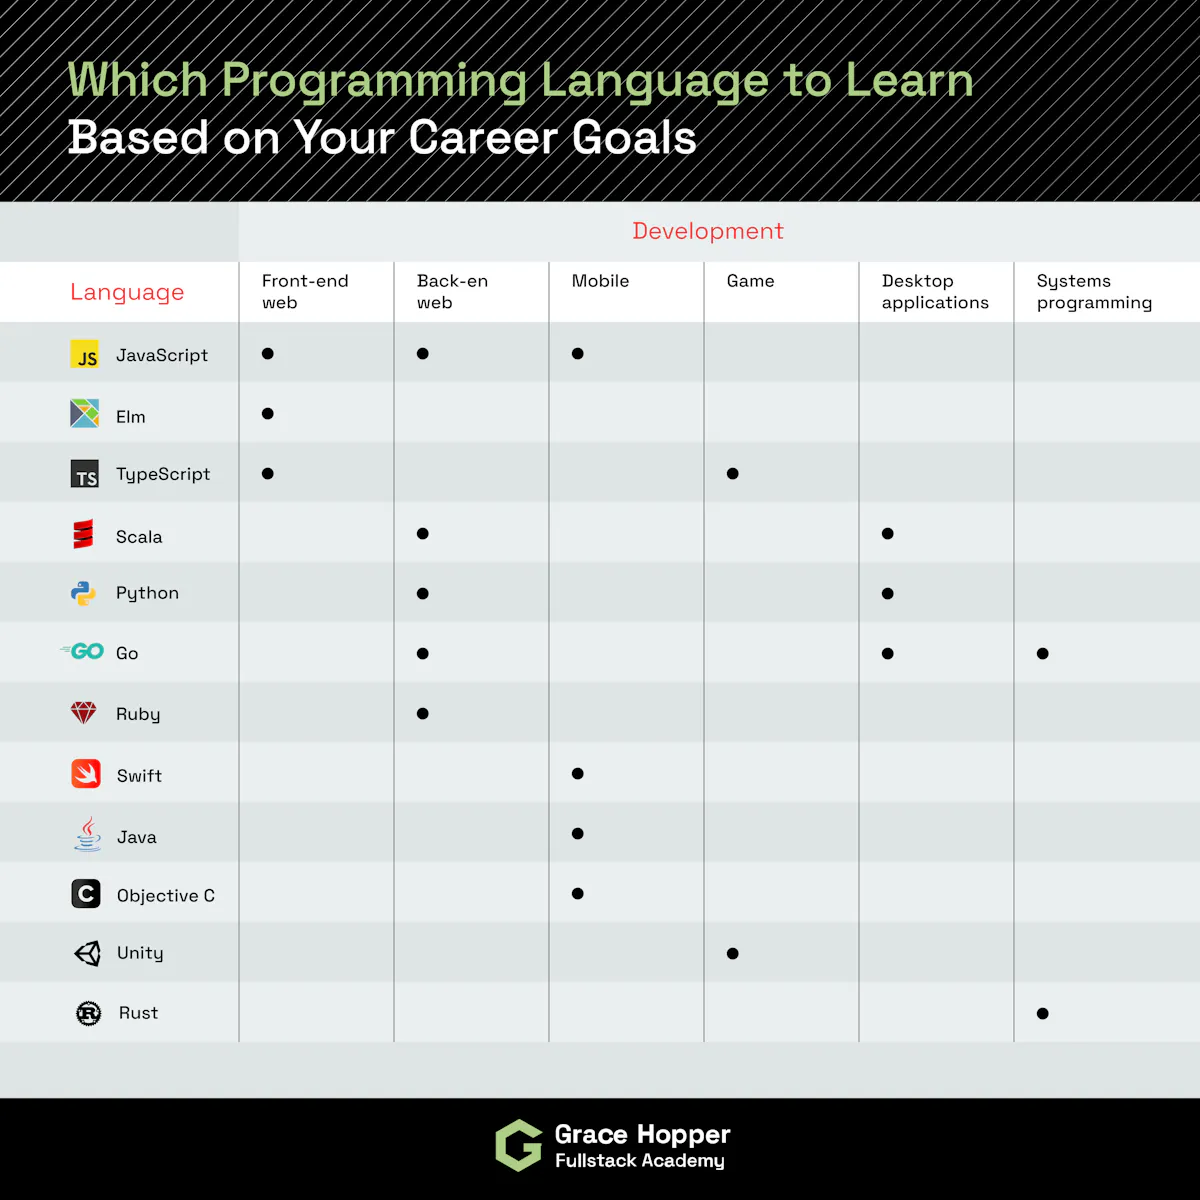 Which Programming Language to Learn Based on Your Career Goals